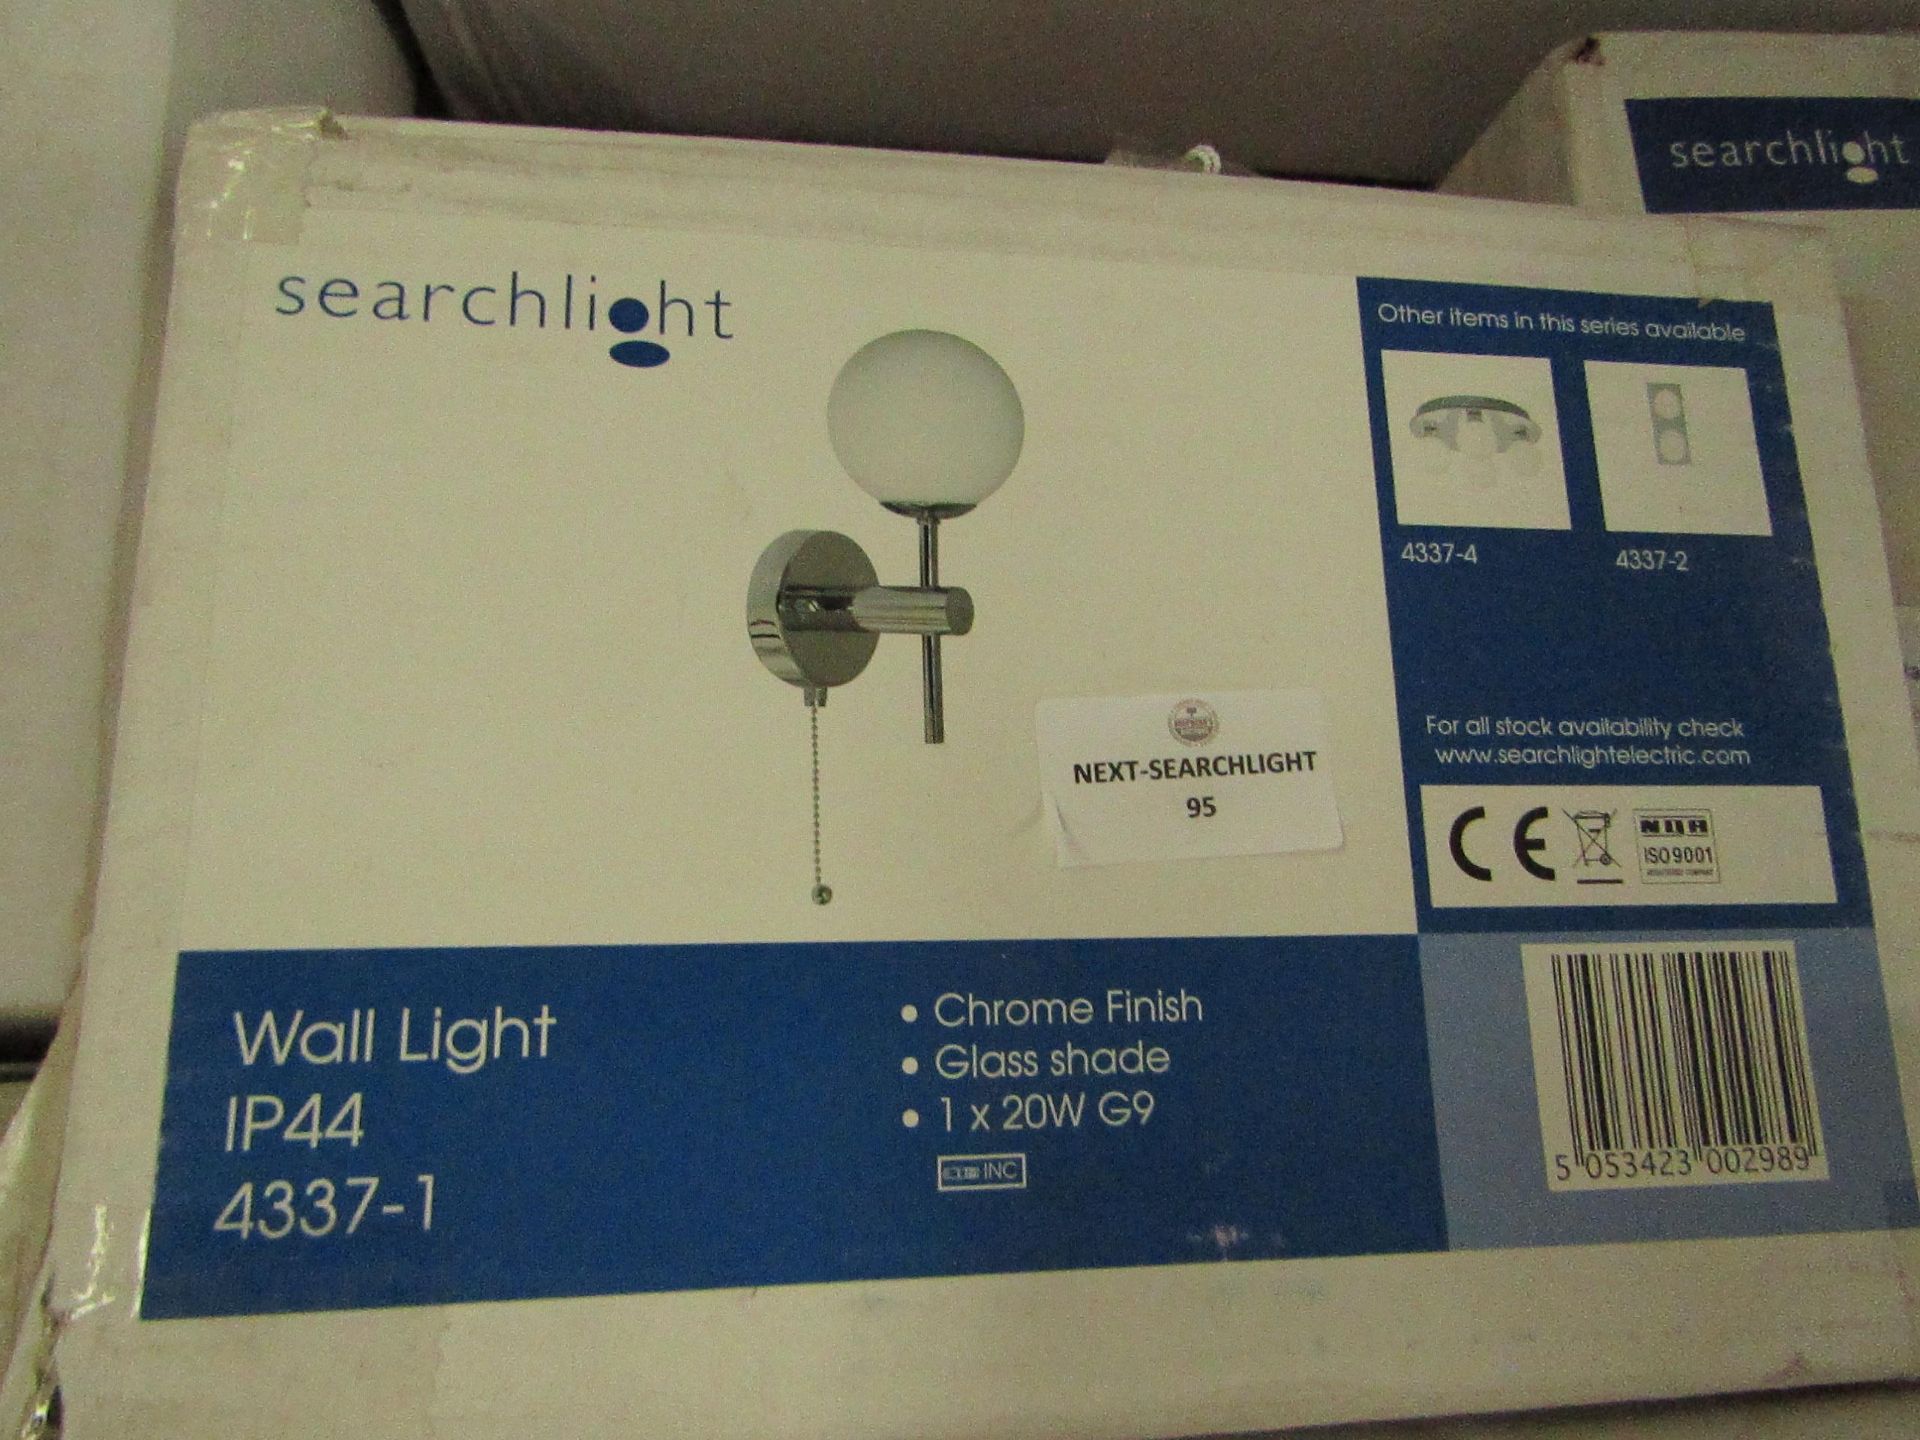 Searchlight Global LED Bathroom Wall Light - Chrome, Mirror & Opal, IP44 RRP “?42.00 - This lot - Image 2 of 2